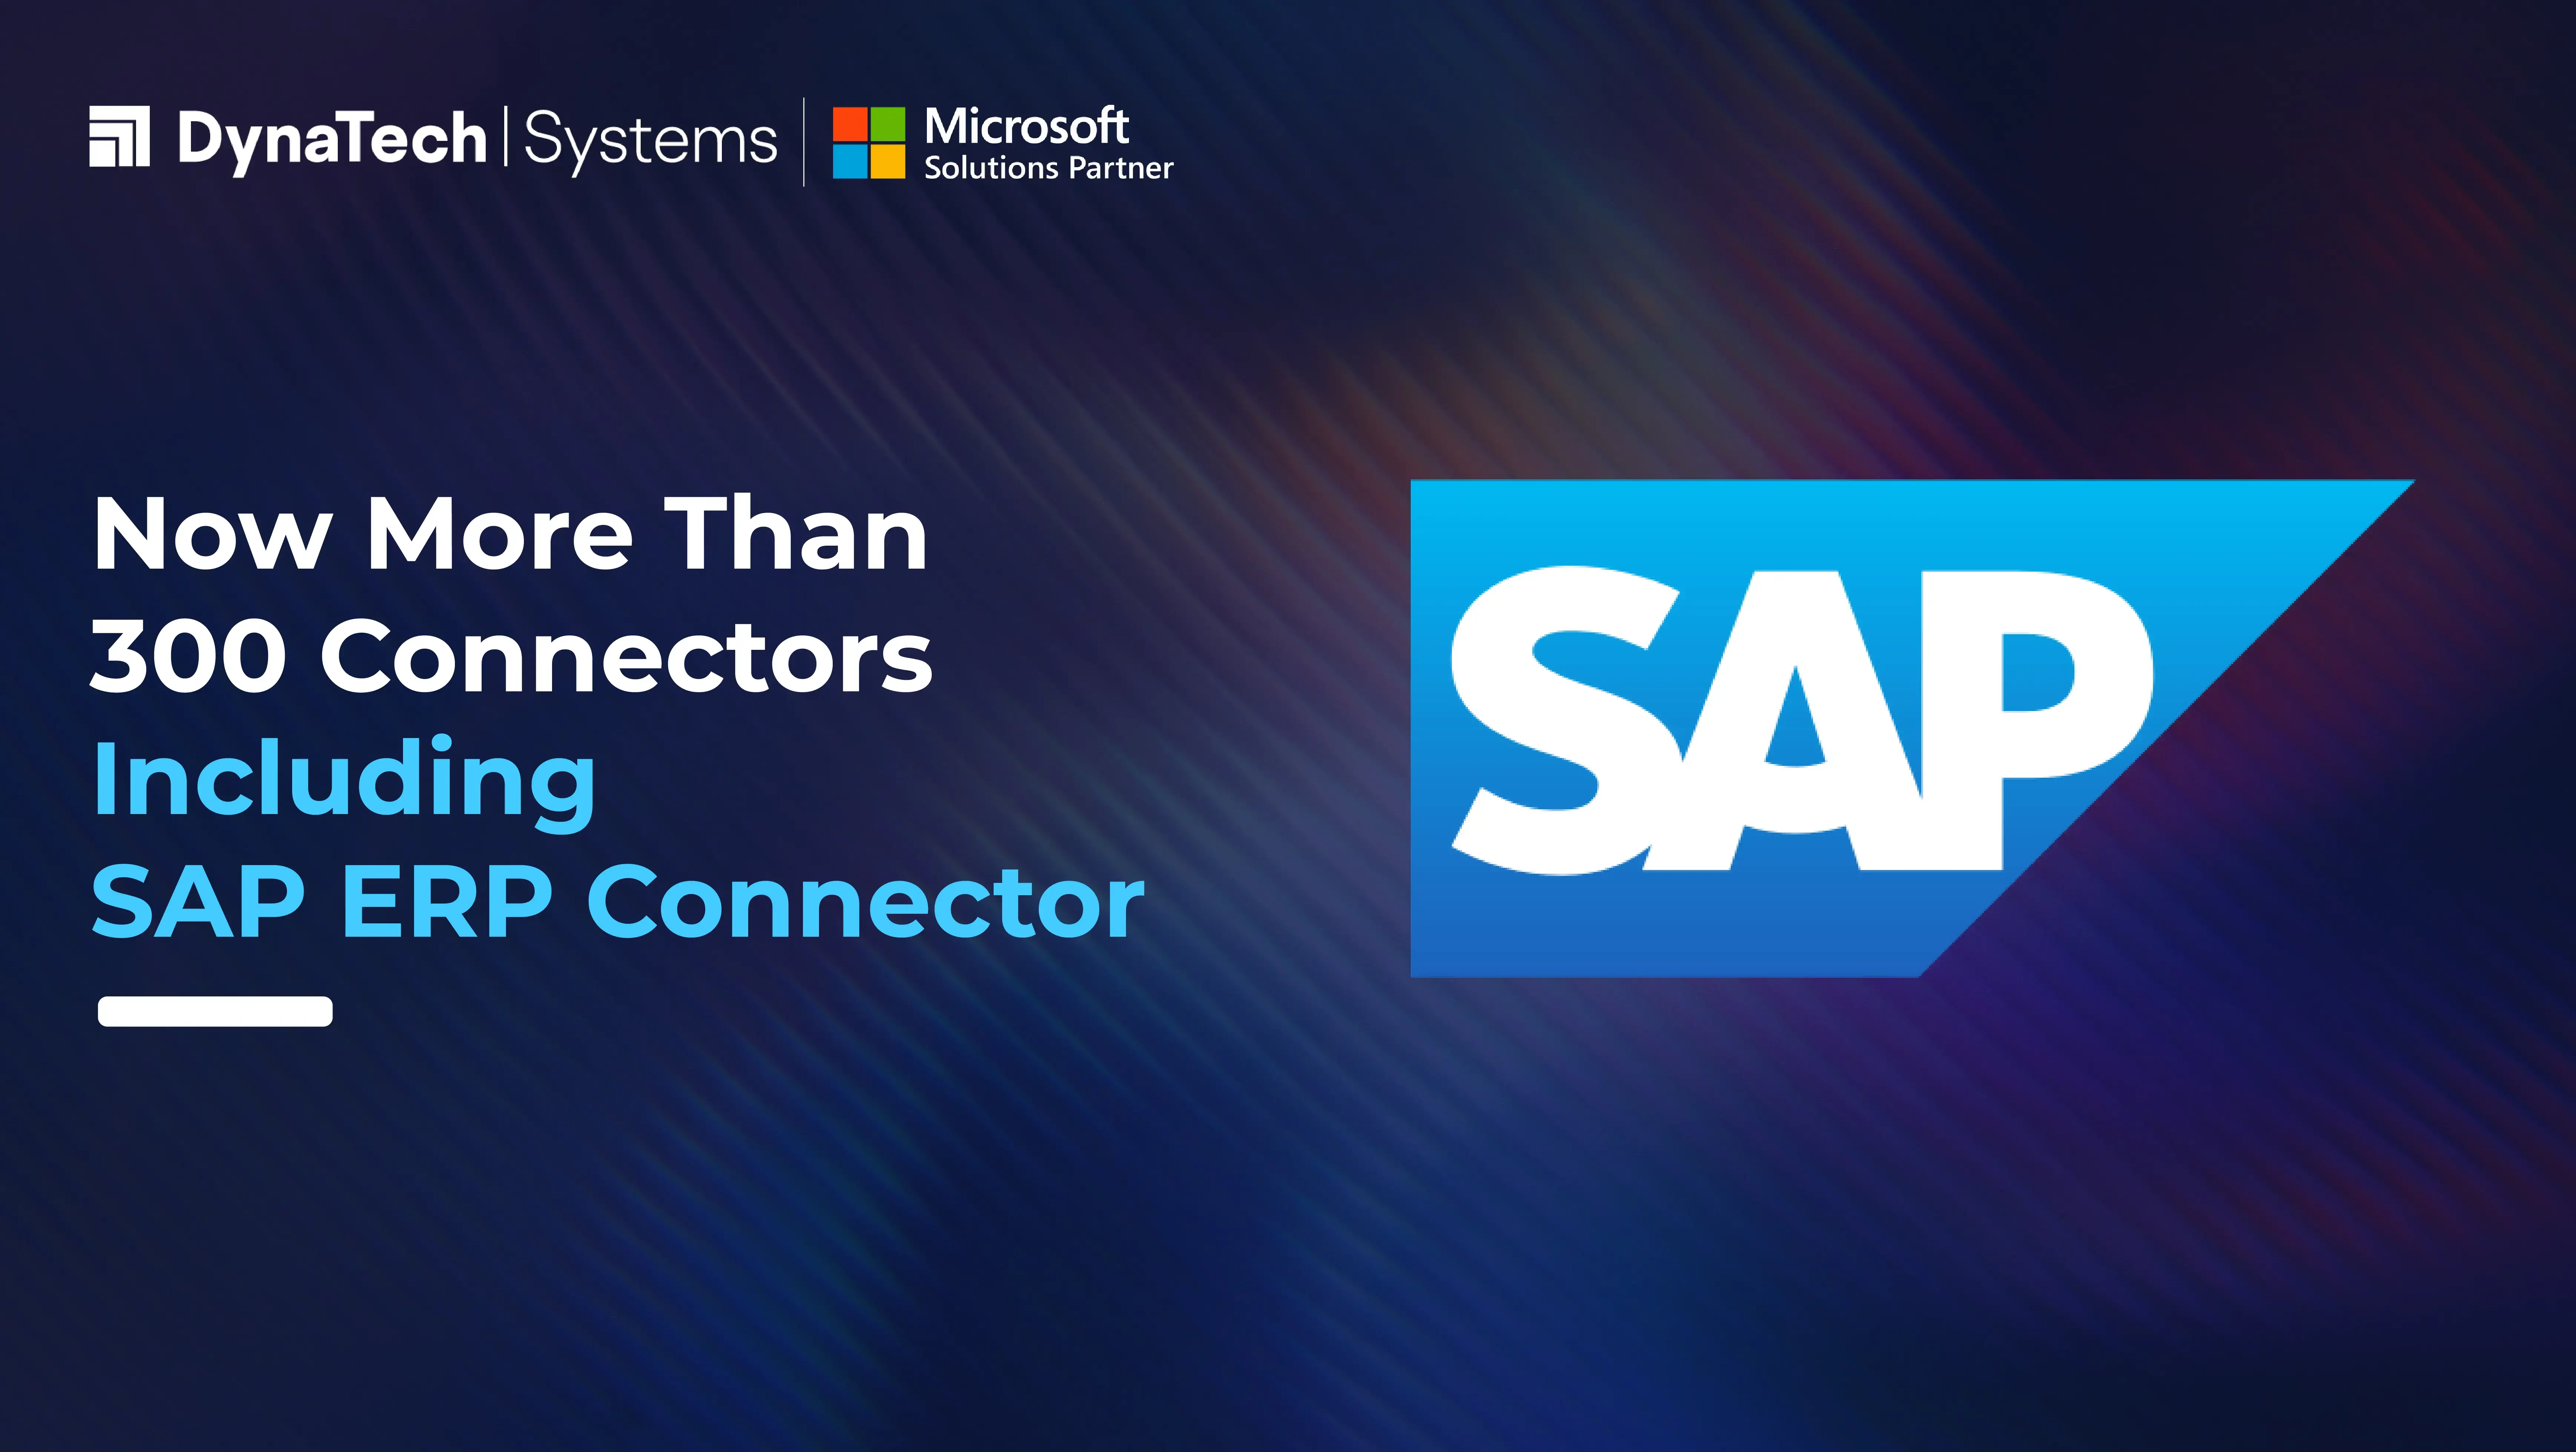 Now More Than 300 Connectors Including SAP ERP Connector